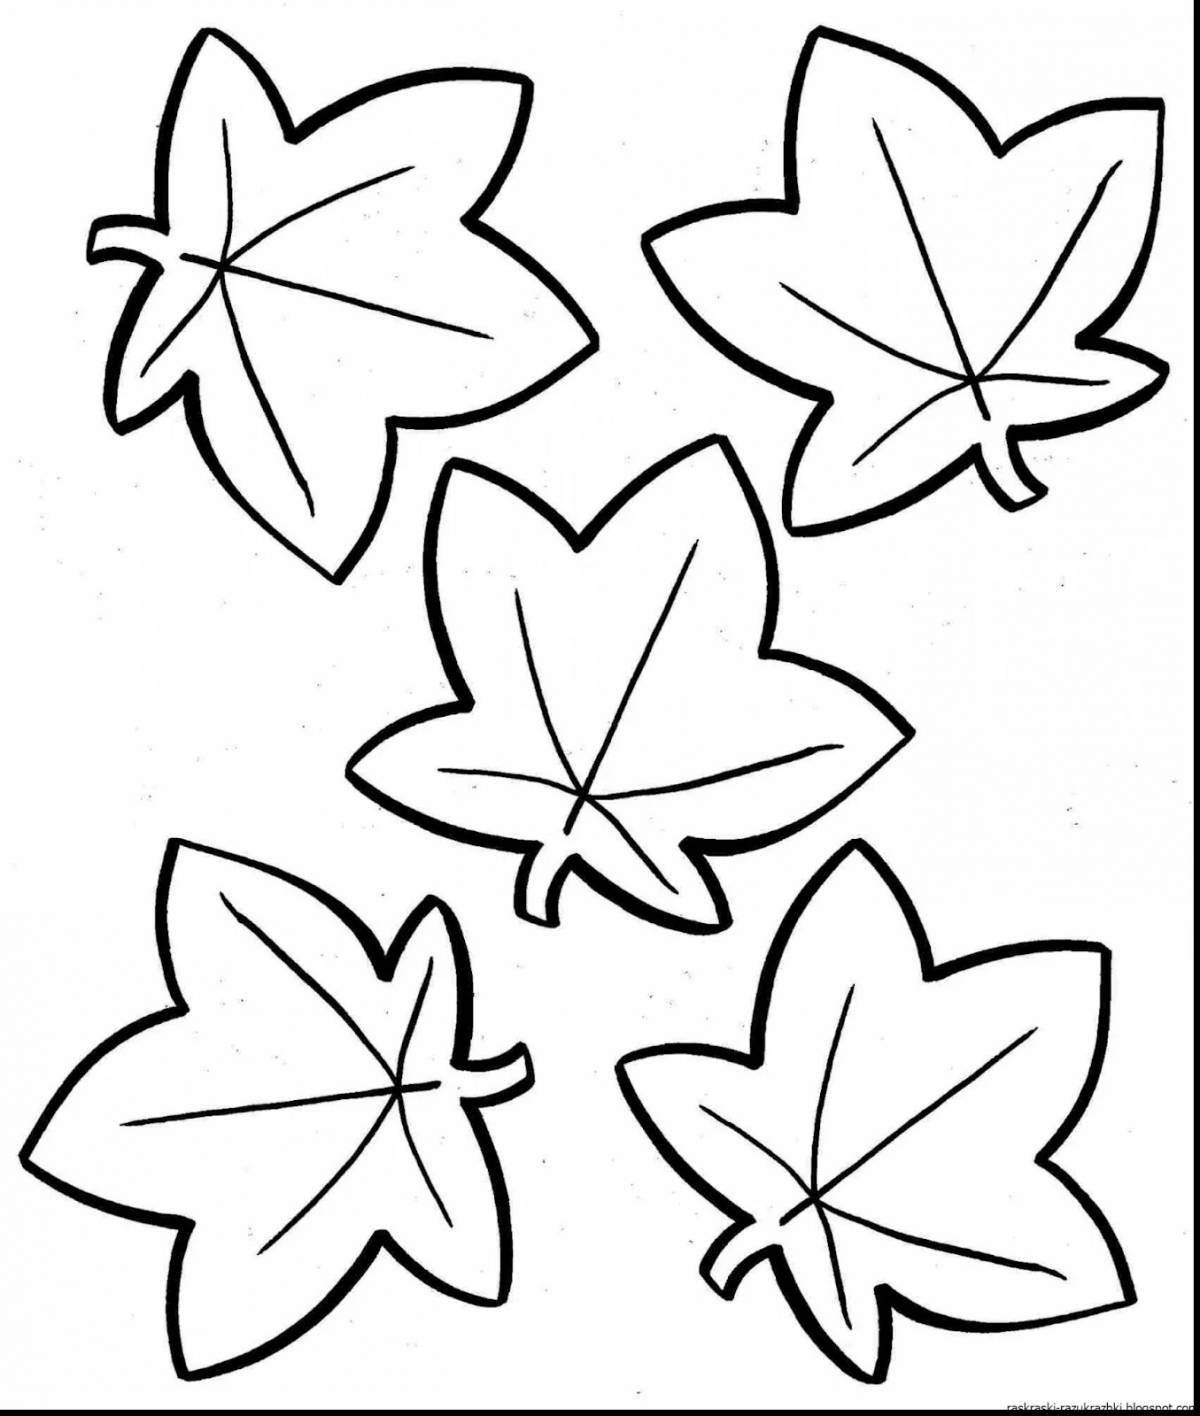 Coloring page dazzlingly many leaves